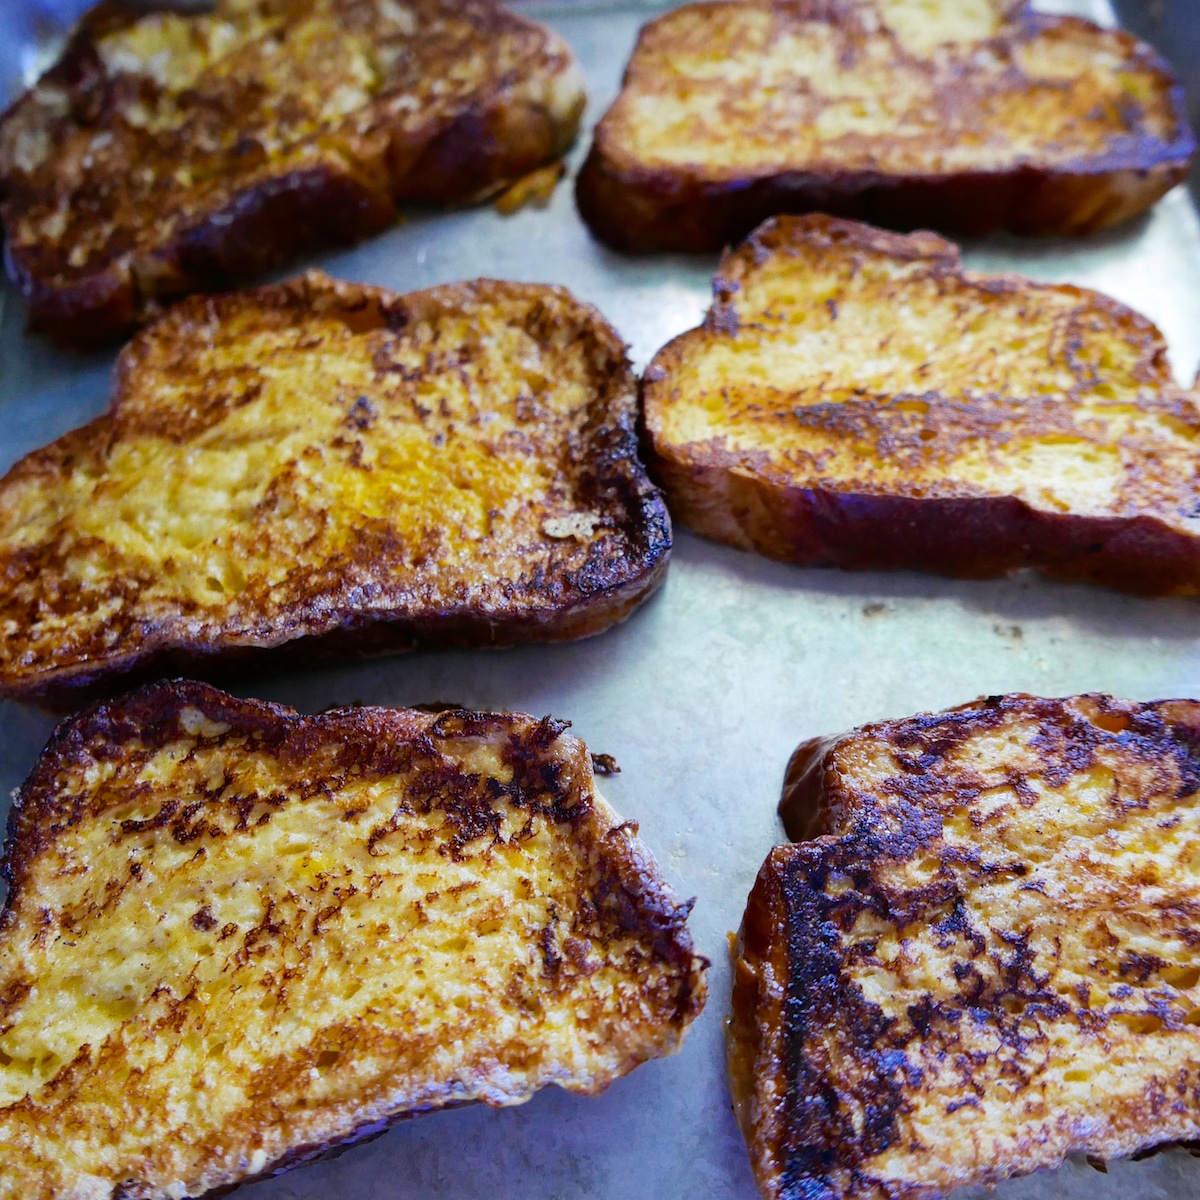 Six pieces of cooked French toast resting on a baking sheet.